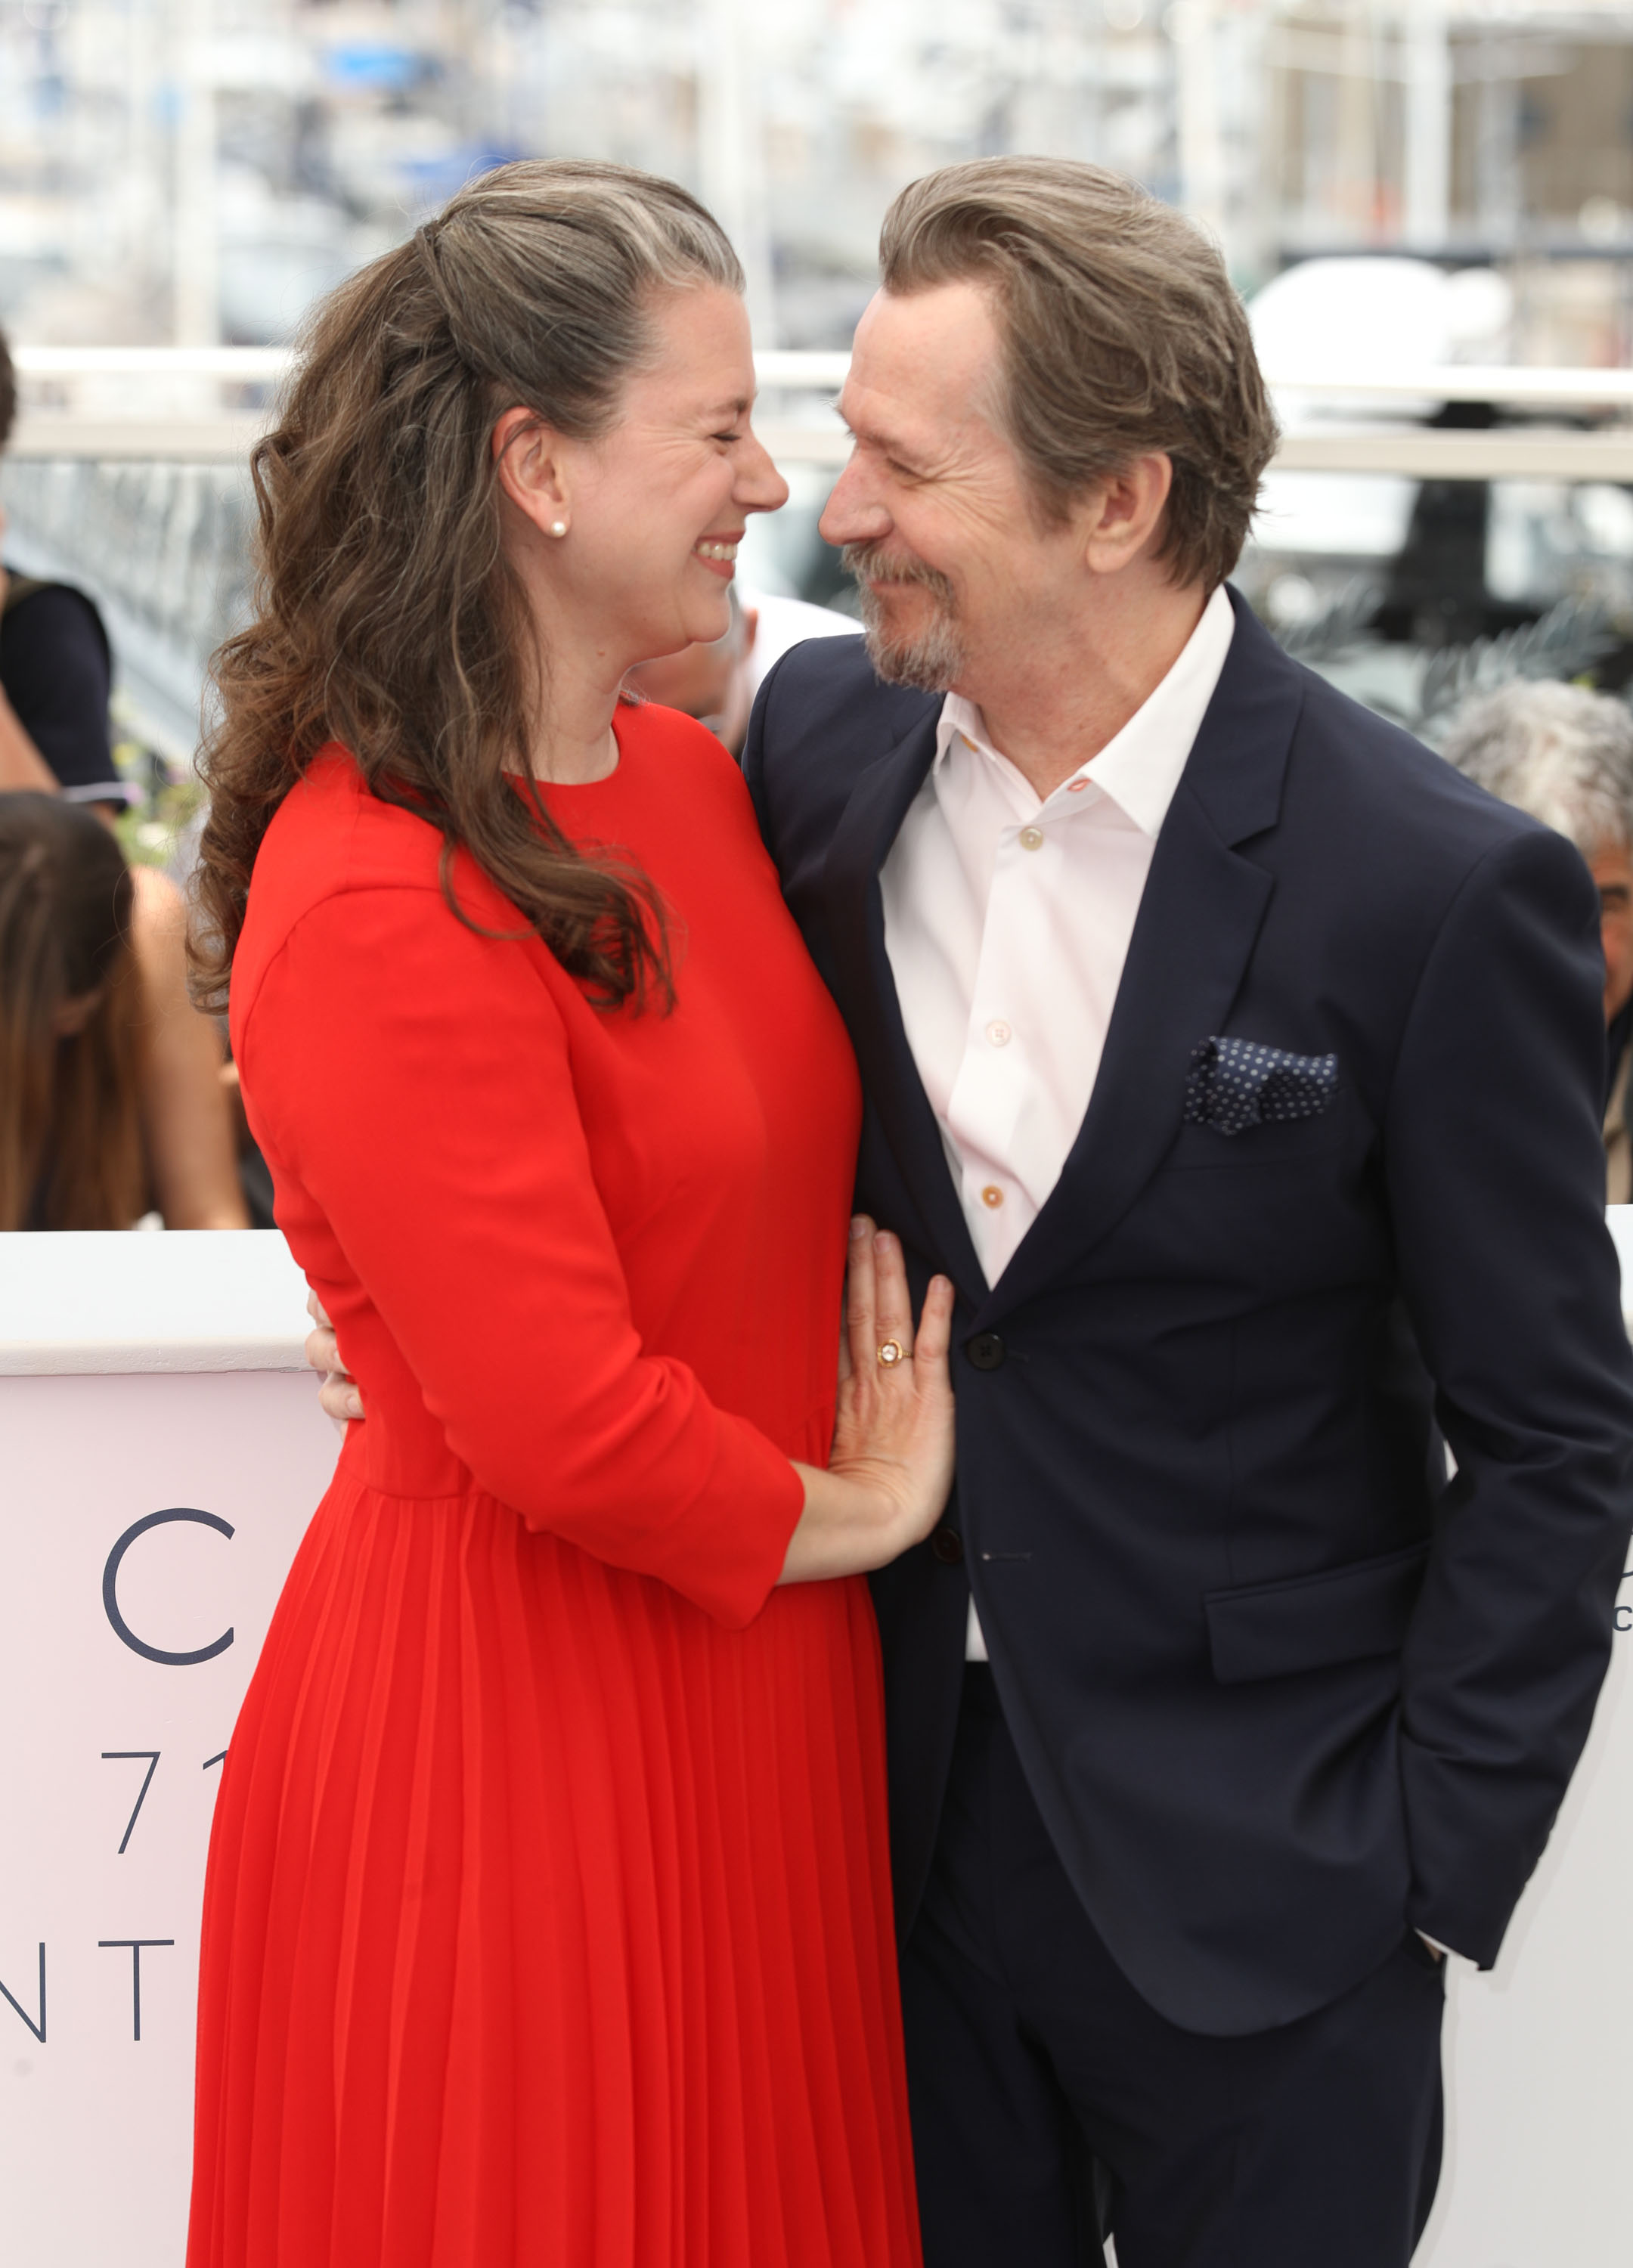 Writer Gisele Schmidt and her husband Gary Oldman attend the photocall for Rendez-Vous With Gary Oldman during the 71st annual Cannes Film Festival at Palais des Festivals on May 17, 2018 in Cannes, France | Source: Getty Images